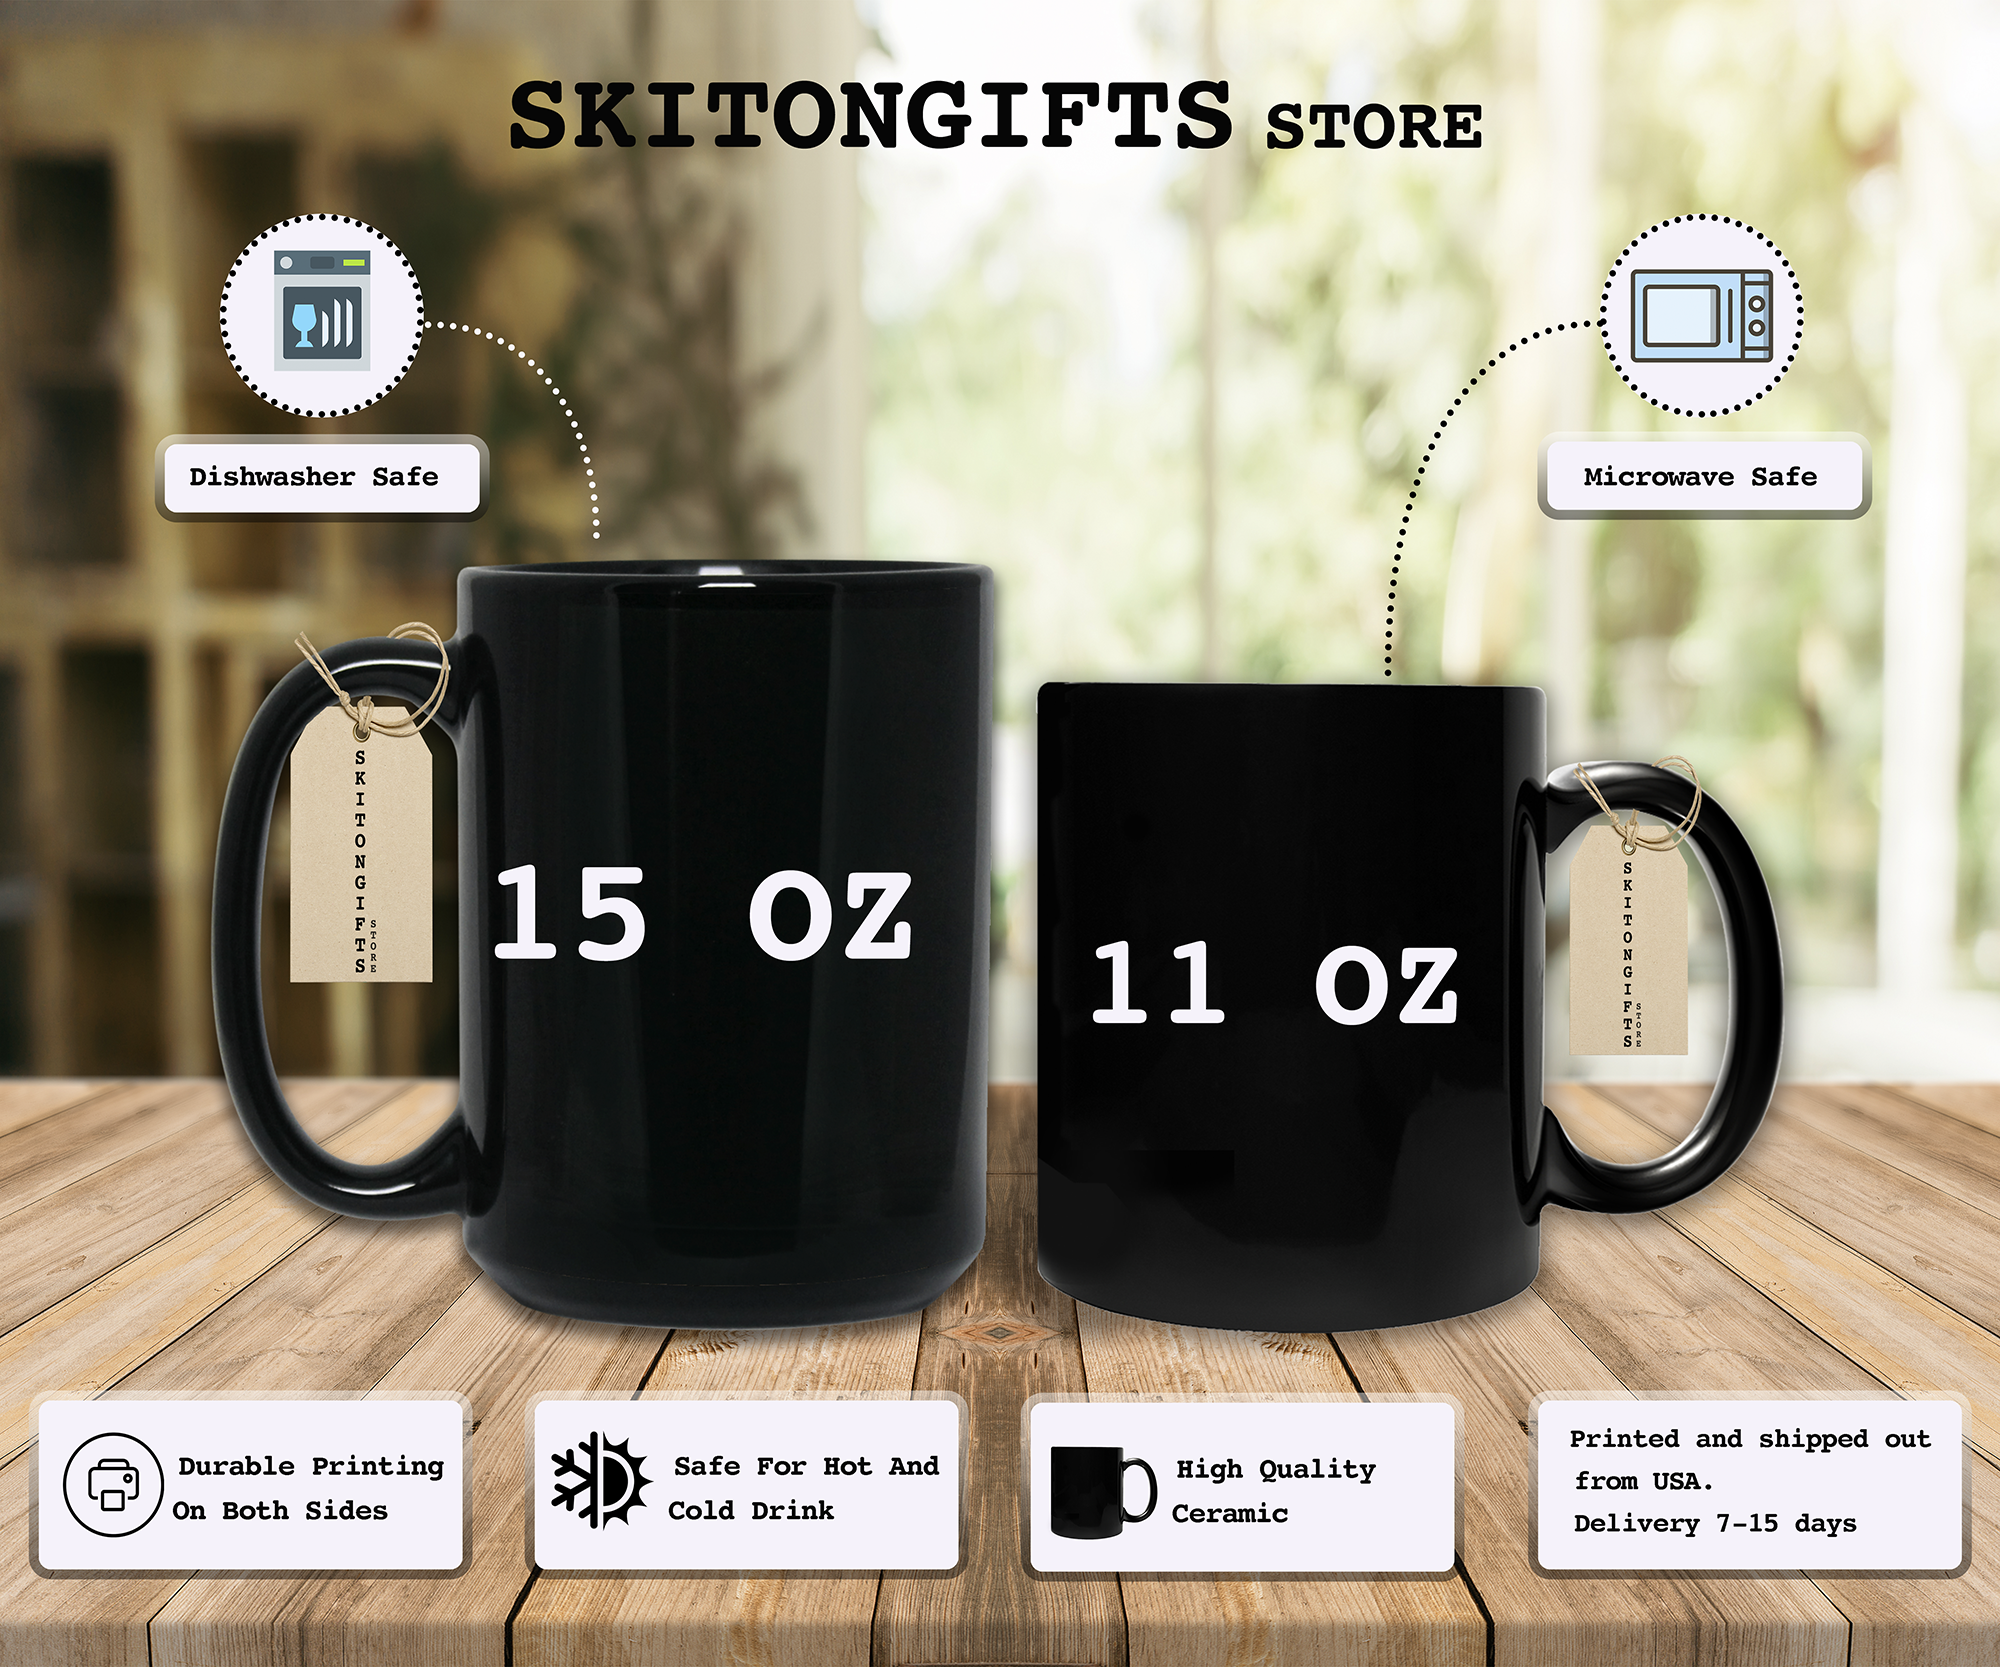 Skitongifts Funny Ceramic Coffee Mug For Birthday, Mother's Day, Father's Day, Christmas NH081221-Best Memaw 5Cpy63L